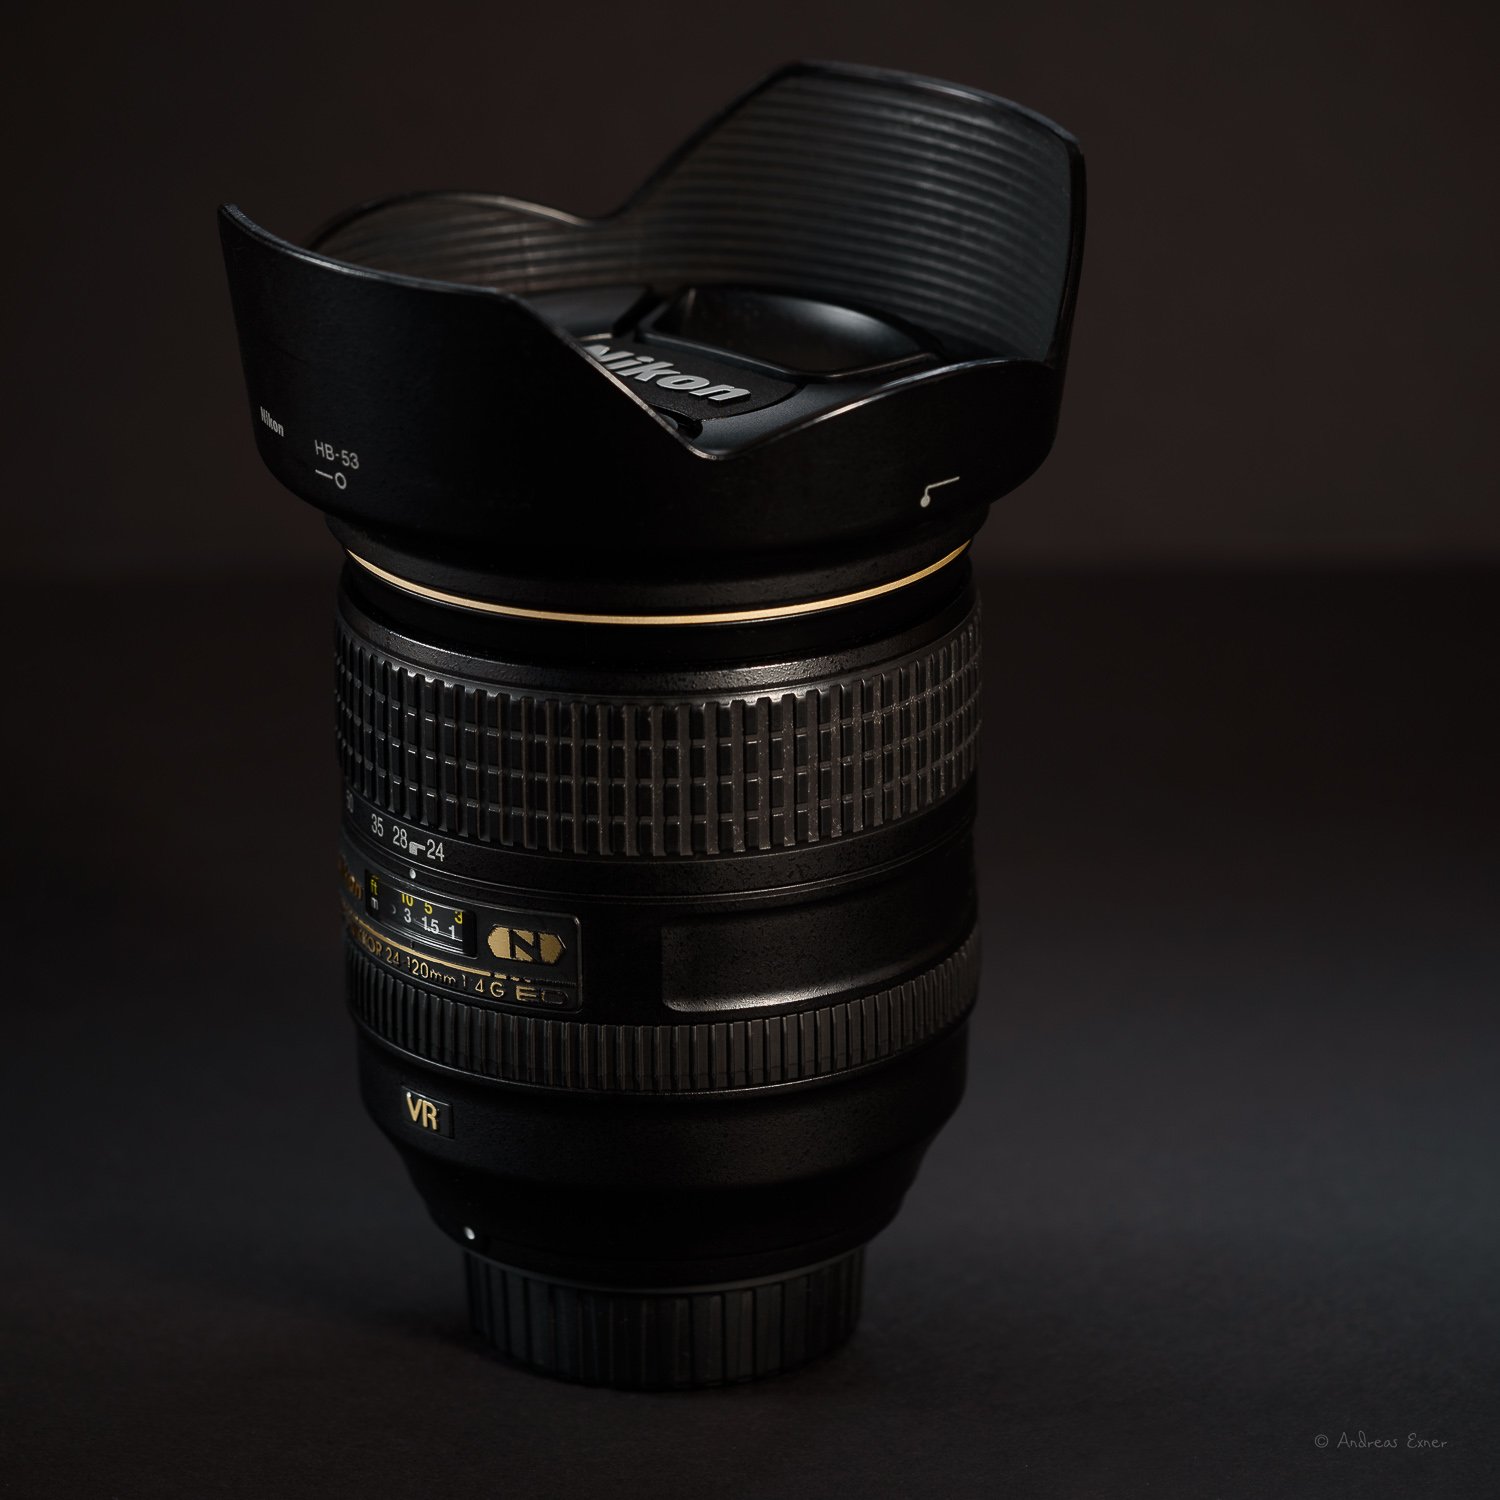  NIKON AF-S NIKKOR 24-120mm f/4G ED VR  This was my walk-around lens for over ten years and many different occasions. The lens is sharp. The only thing I always disliked was the lens creep that occurs easily if you carry the lens with the front eleme